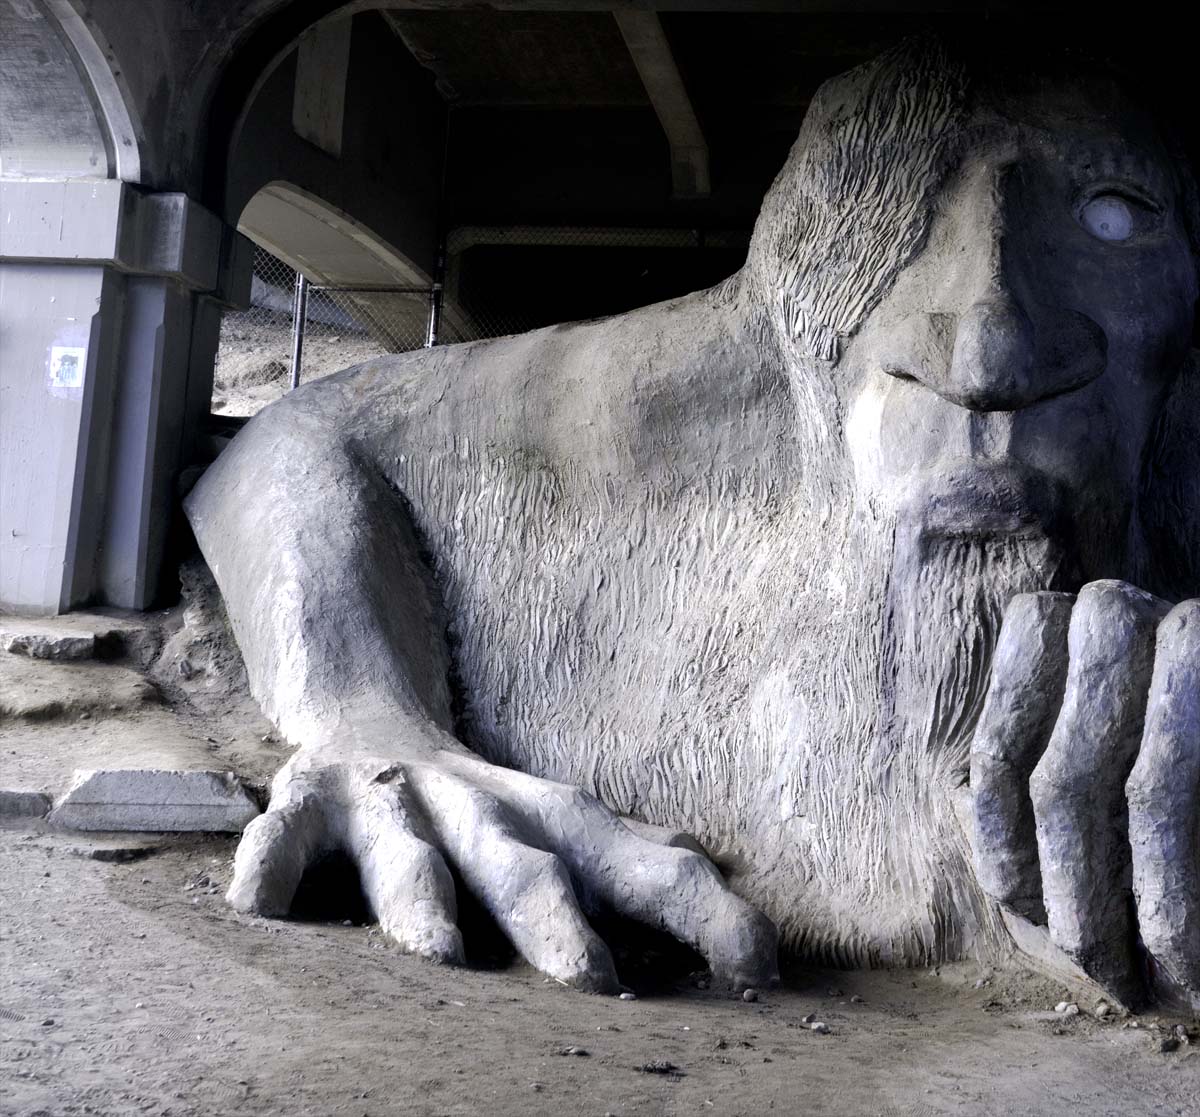 Fremont Troll sculpture in one of the coolest neighborhoods in Seattle